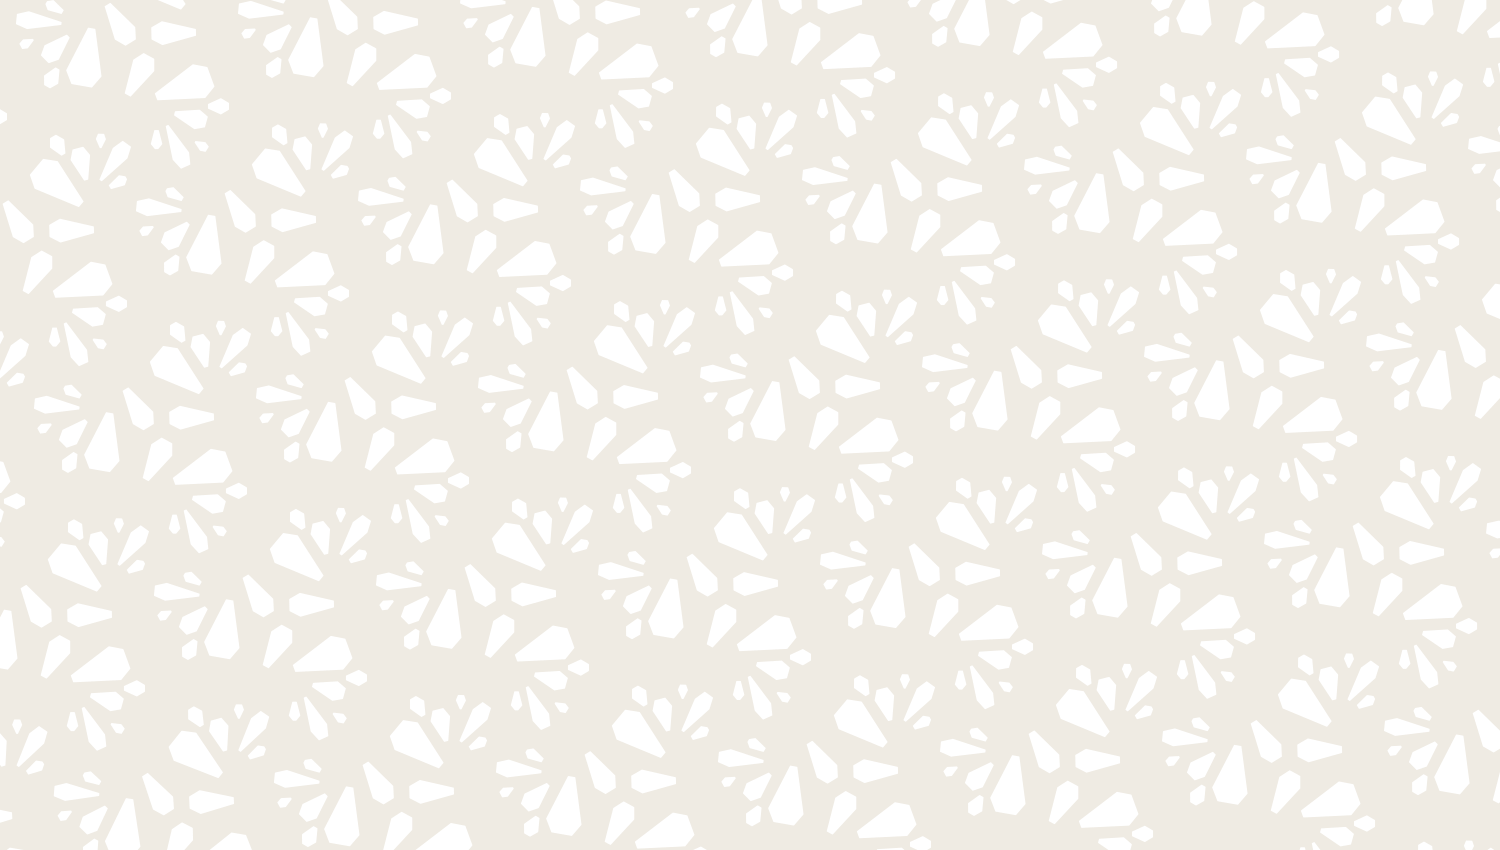 Parasoleil™ Antwerp© pattern displayed with a cream color overlay